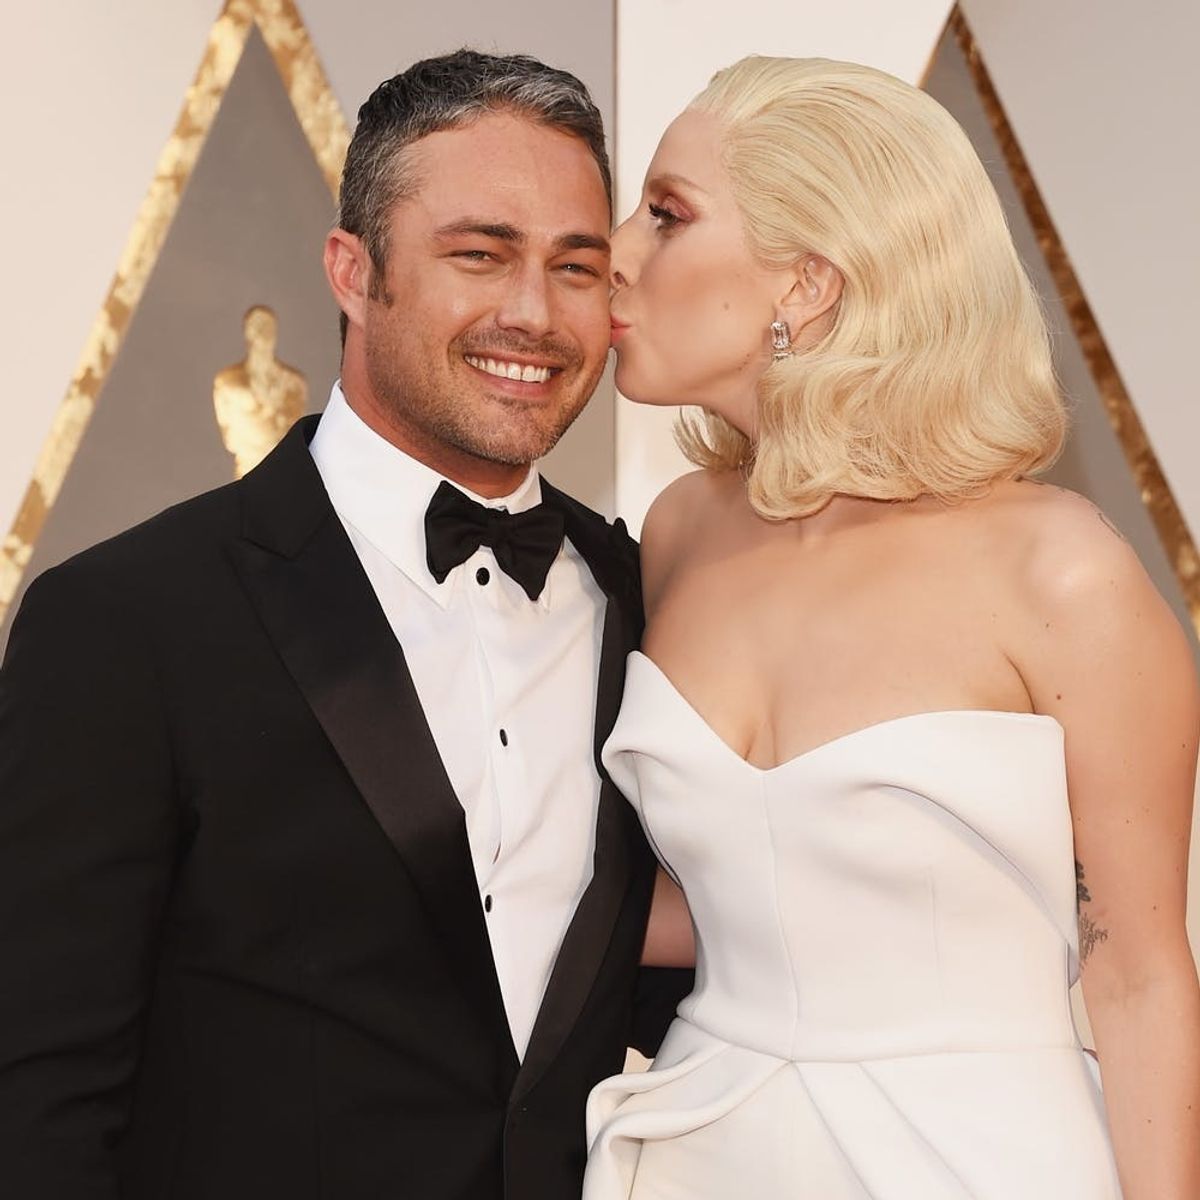 Taylor Kinney Just Gave Fans Hope for a Reunion With Lady Gaga by Showing Up to Her Concert